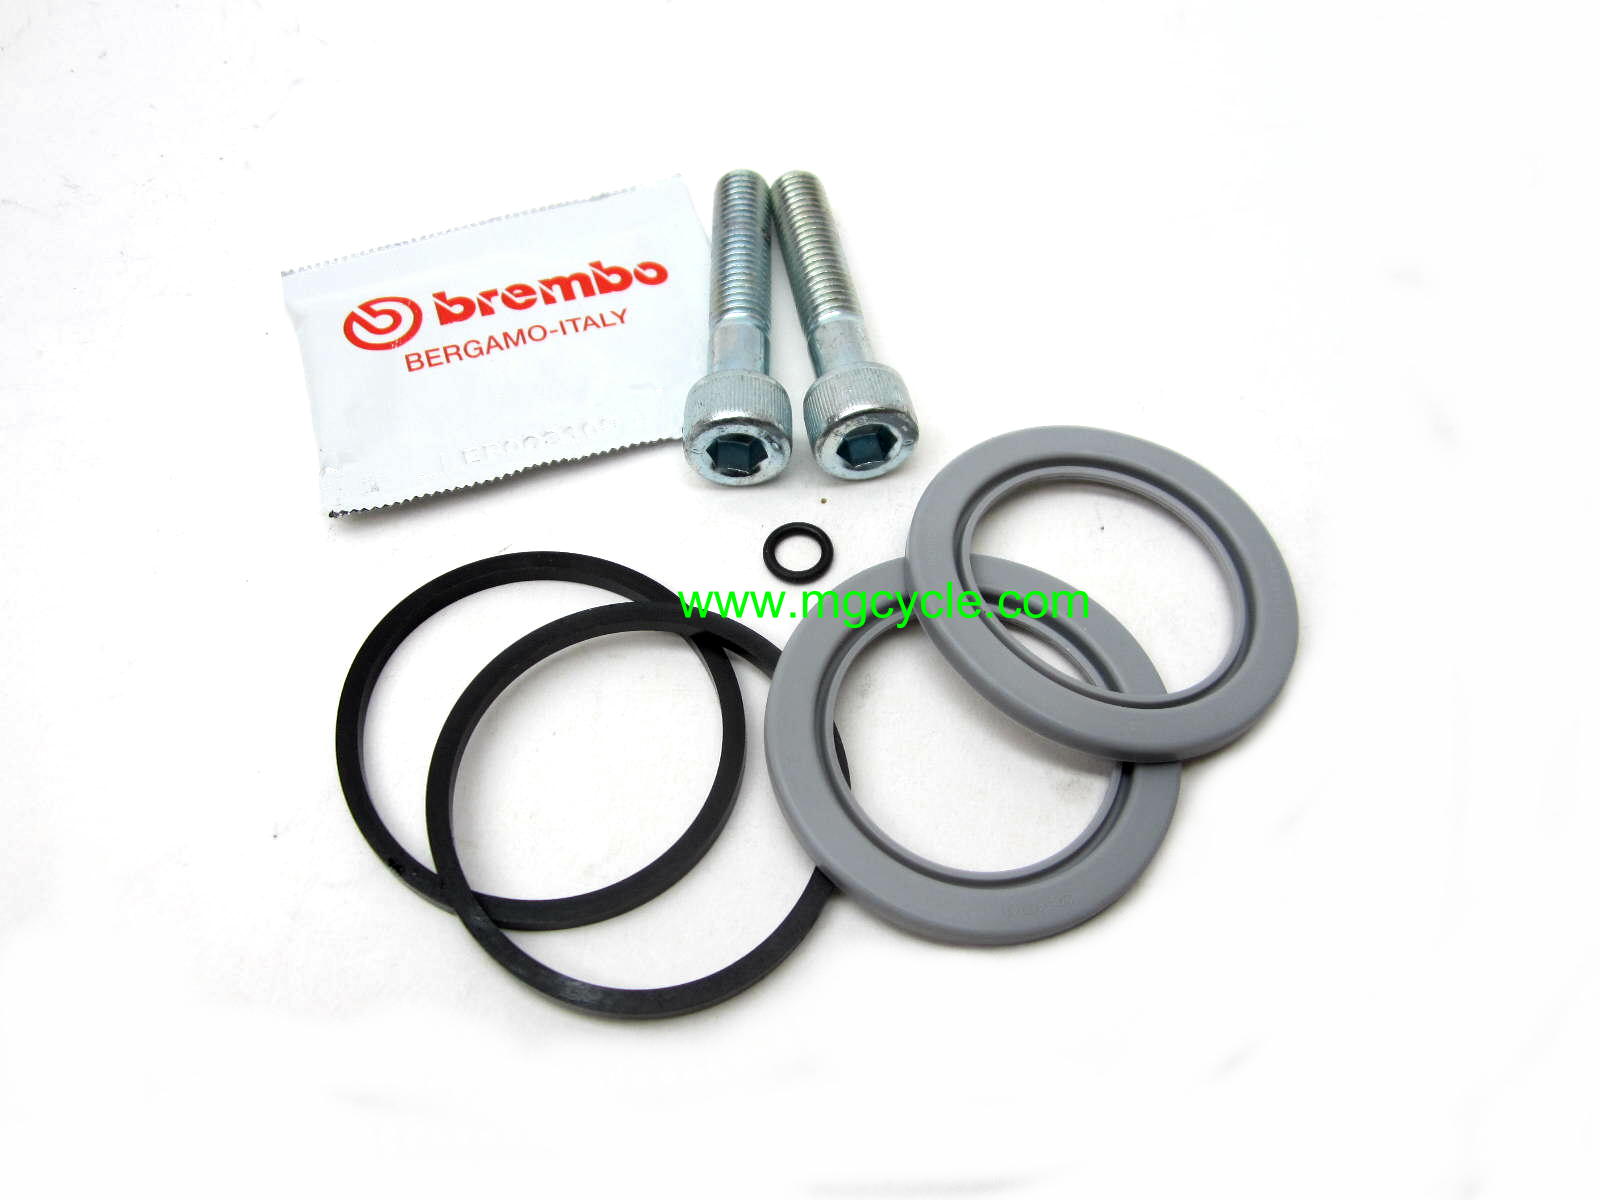 Brembo seal kit for 48mm F09 caliper SP1000 BMW GU18659050 - Click Image to Close